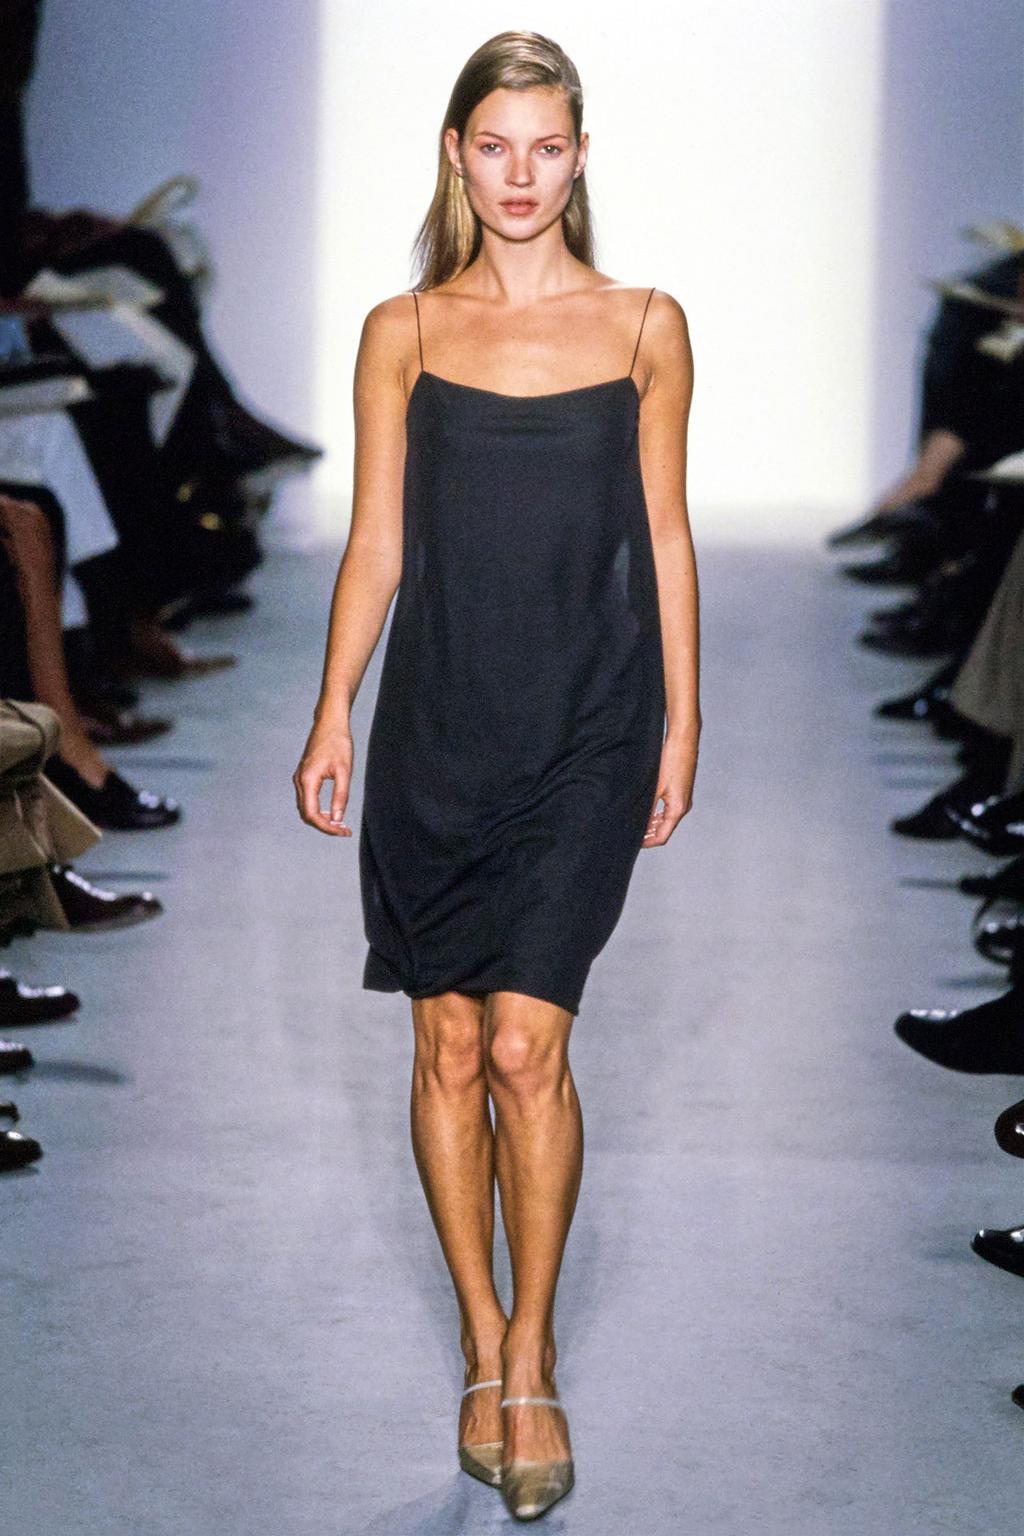 Kate Moss in the Marc Jacobs Spring '98 runway show wearing the